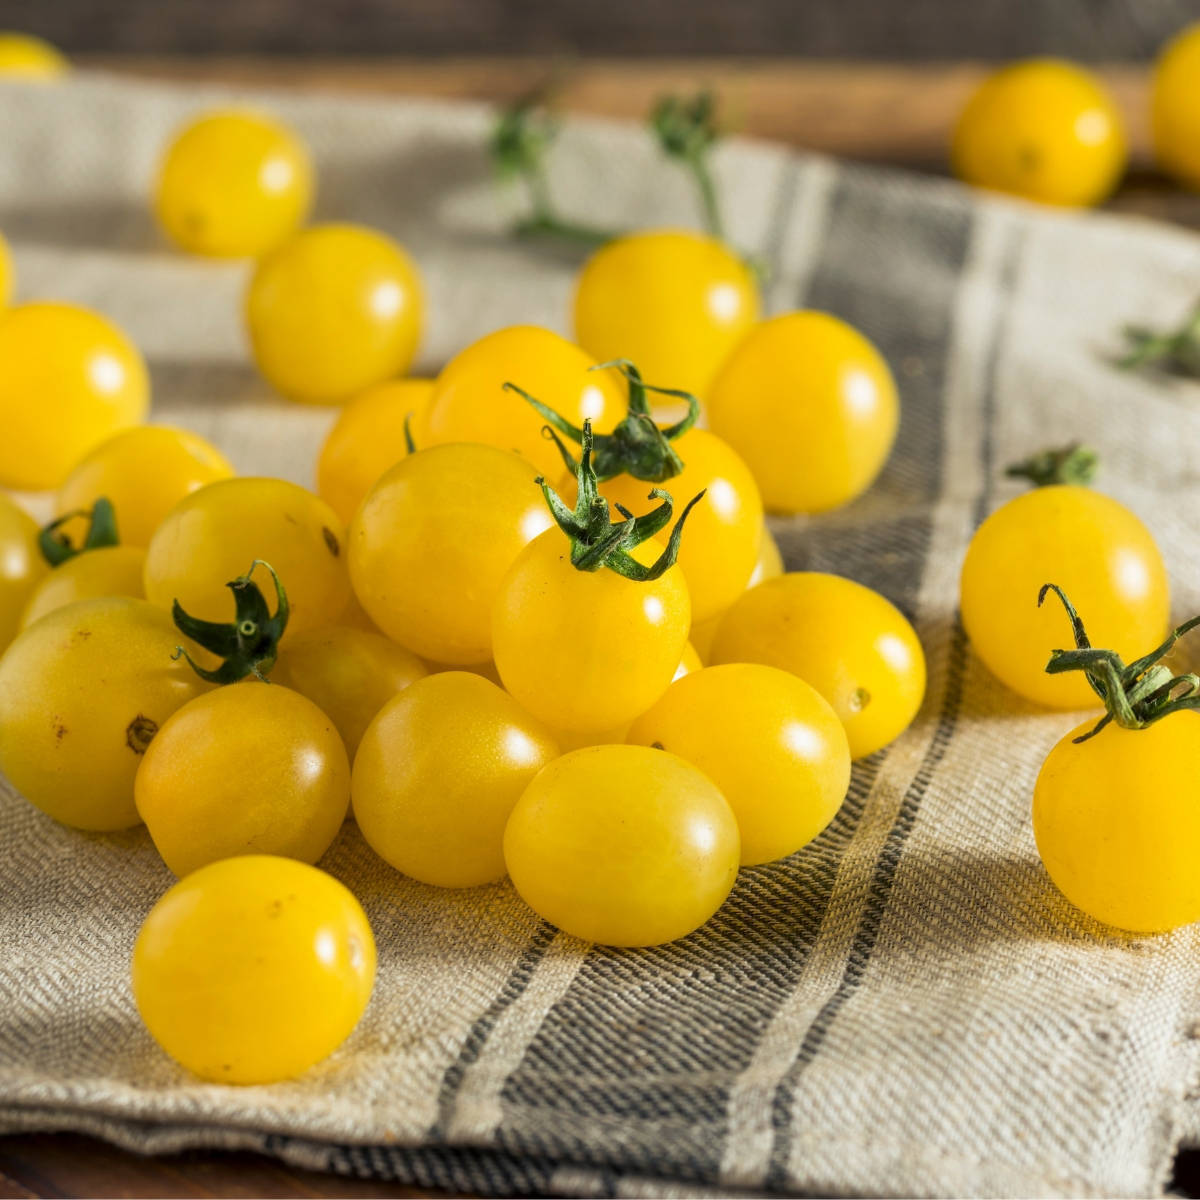 COMB S/H Yellow Candy Cherry Tomato The sweetest cherry tomato 20 SEEDS 